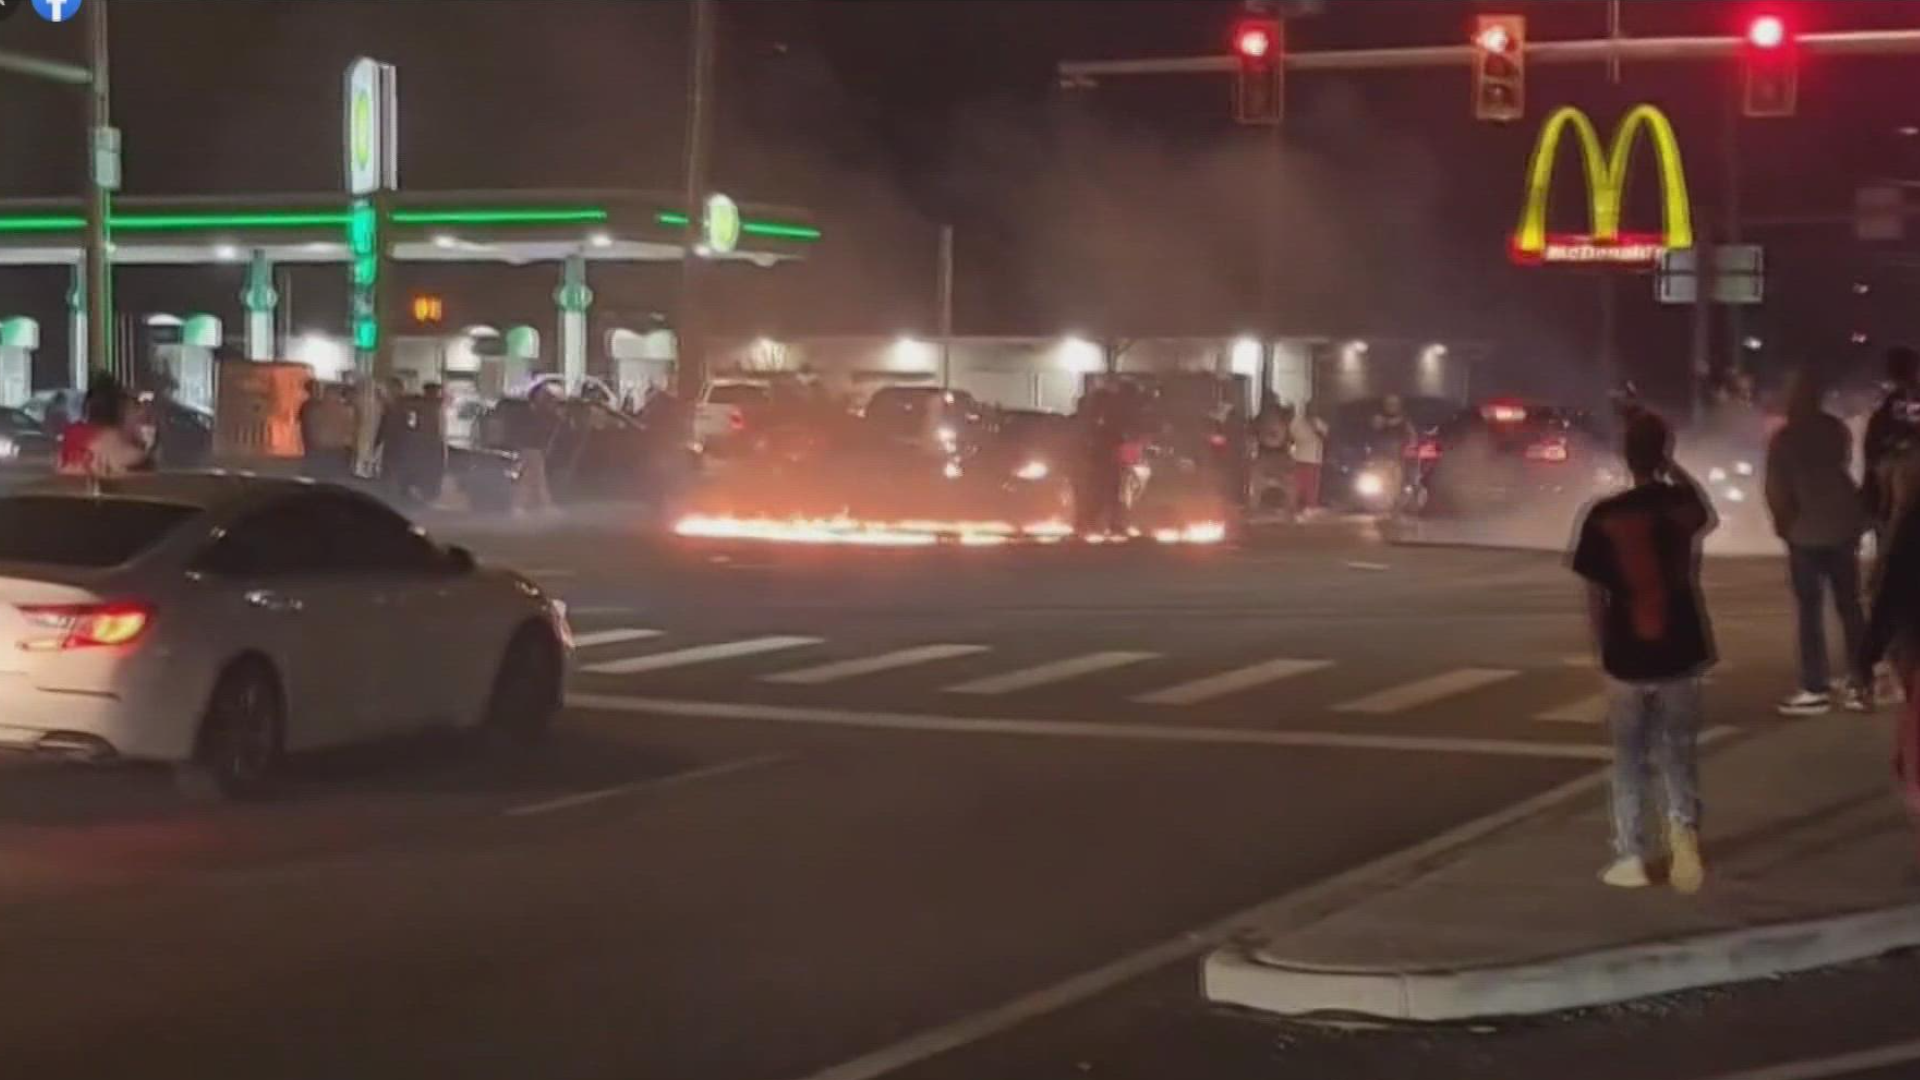 Unknown people were seen doing donuts at the intersection of Hill and Reynolds around 8:30 p.m. Saturday, stopping traffic and causing a circle of fire in the road.